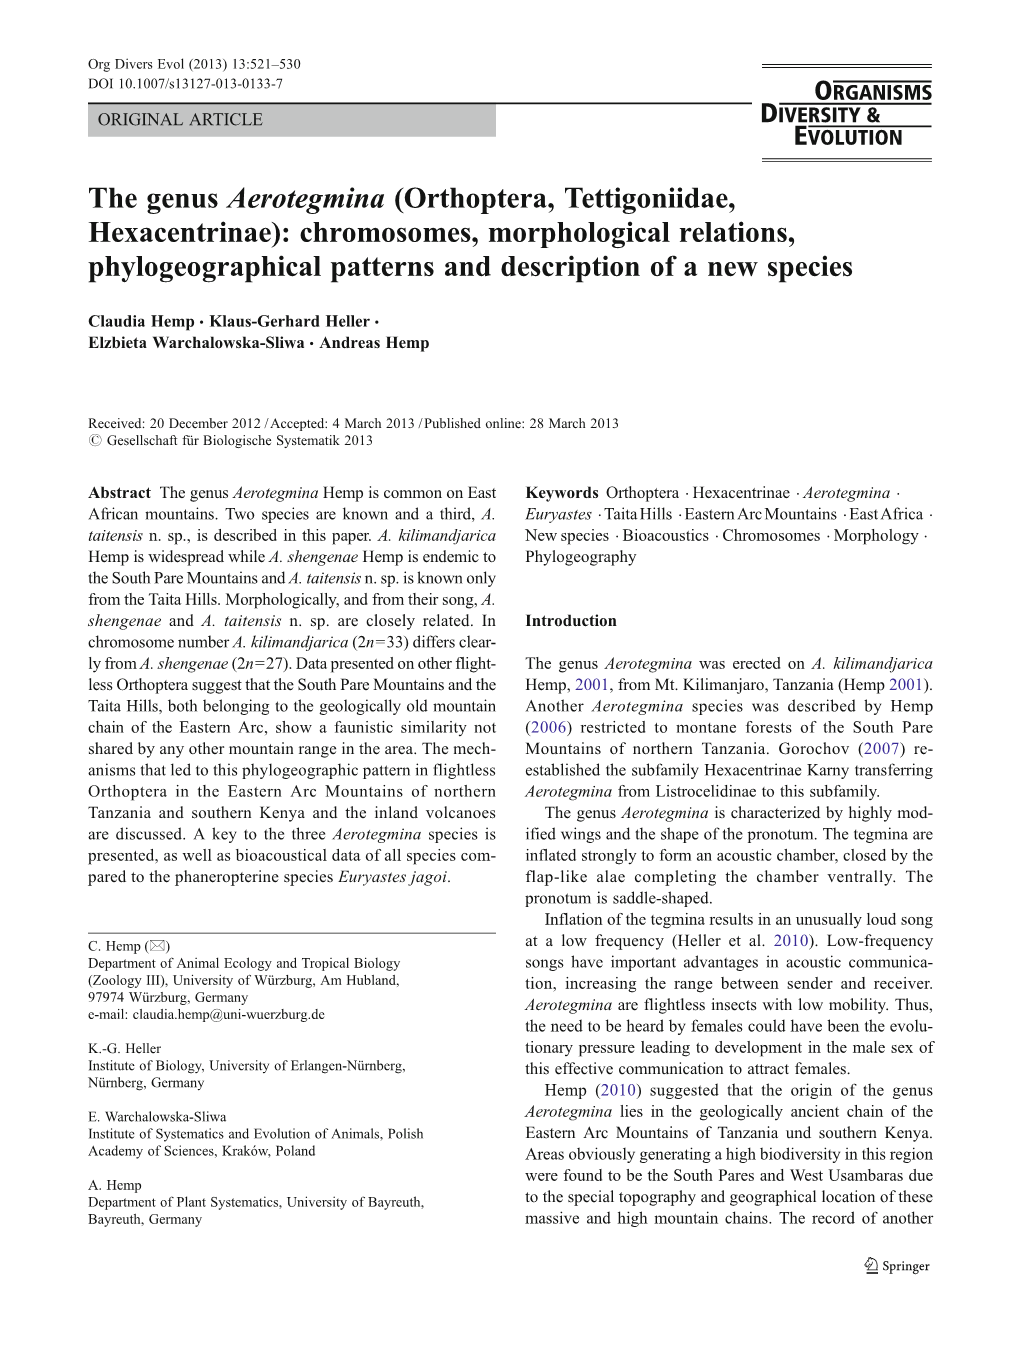 Orthoptera, Tettigoniidae, Hexacentrinae): Chromosomes, Morphological Relations, Phylogeographical Patterns and Description of a New Species